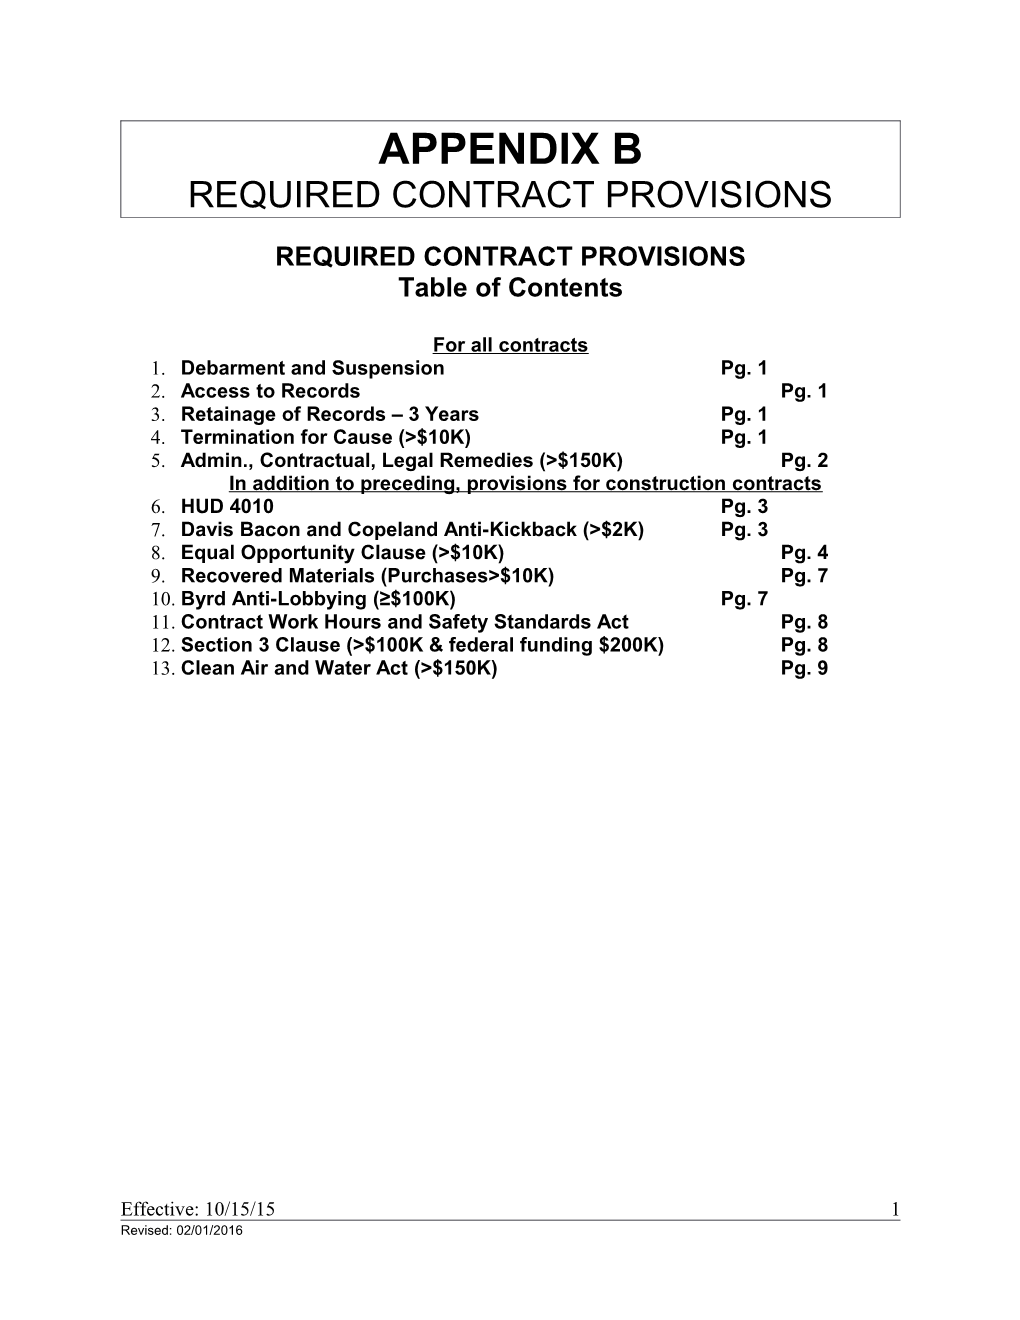 Required Contract Provisions s1